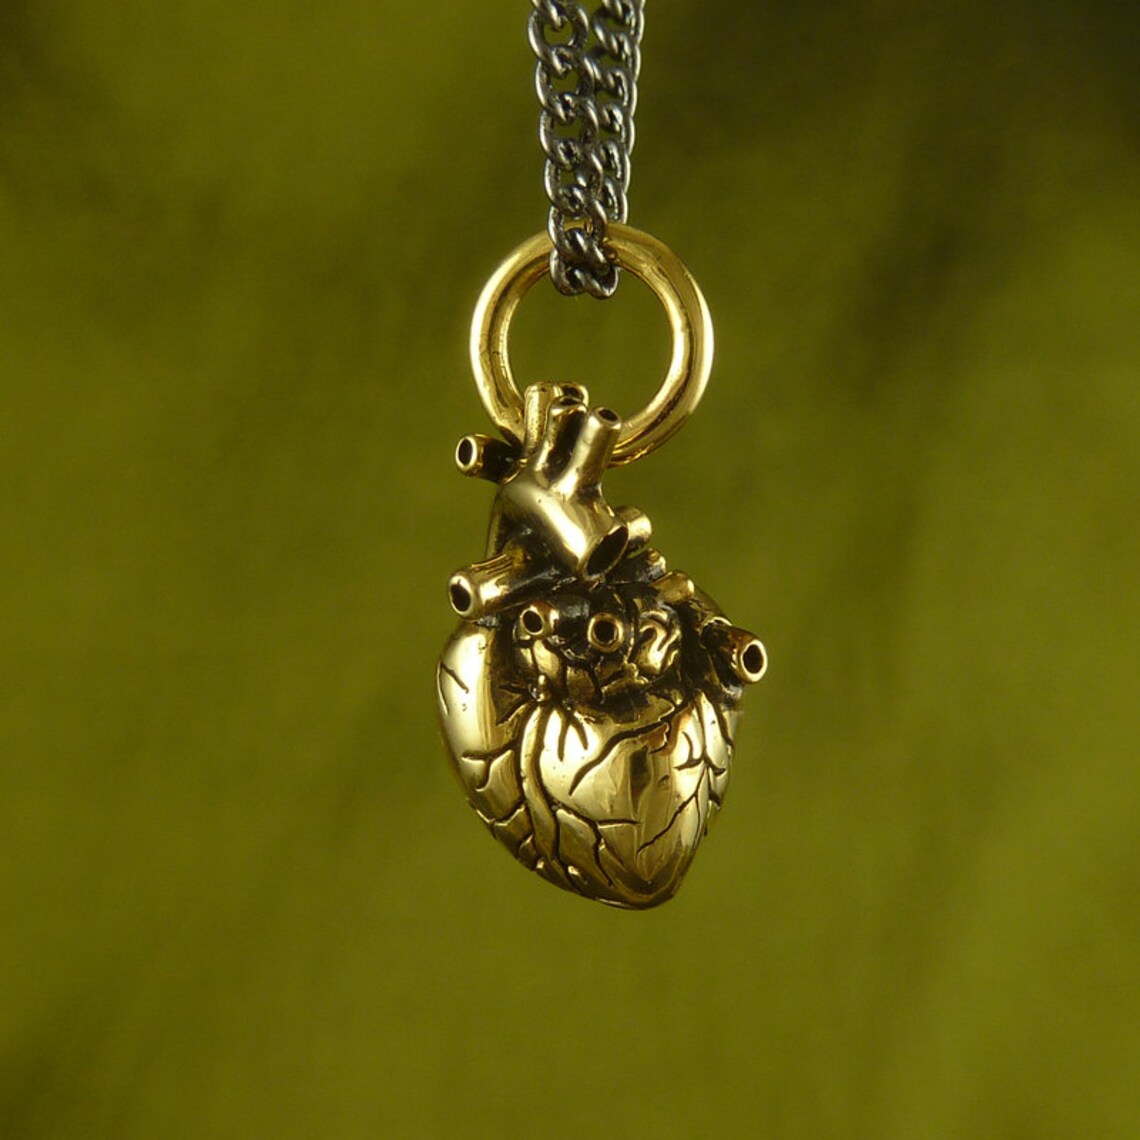 Large Silver Anatomical Heart Pendant with Rubies - The Great Frog